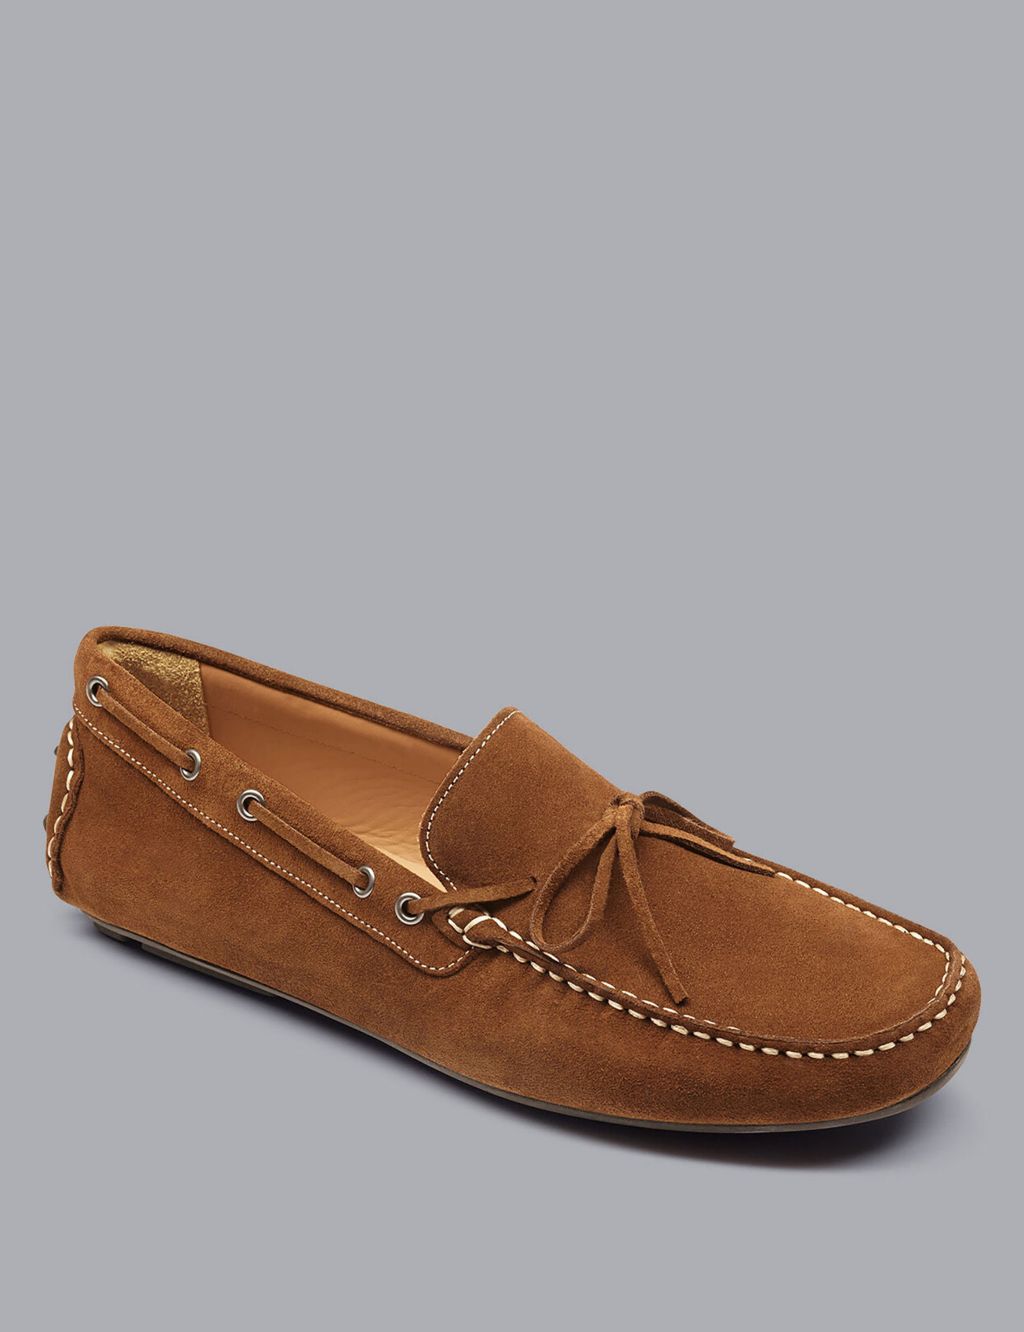 Suede Slip On Driving Loafers image 2